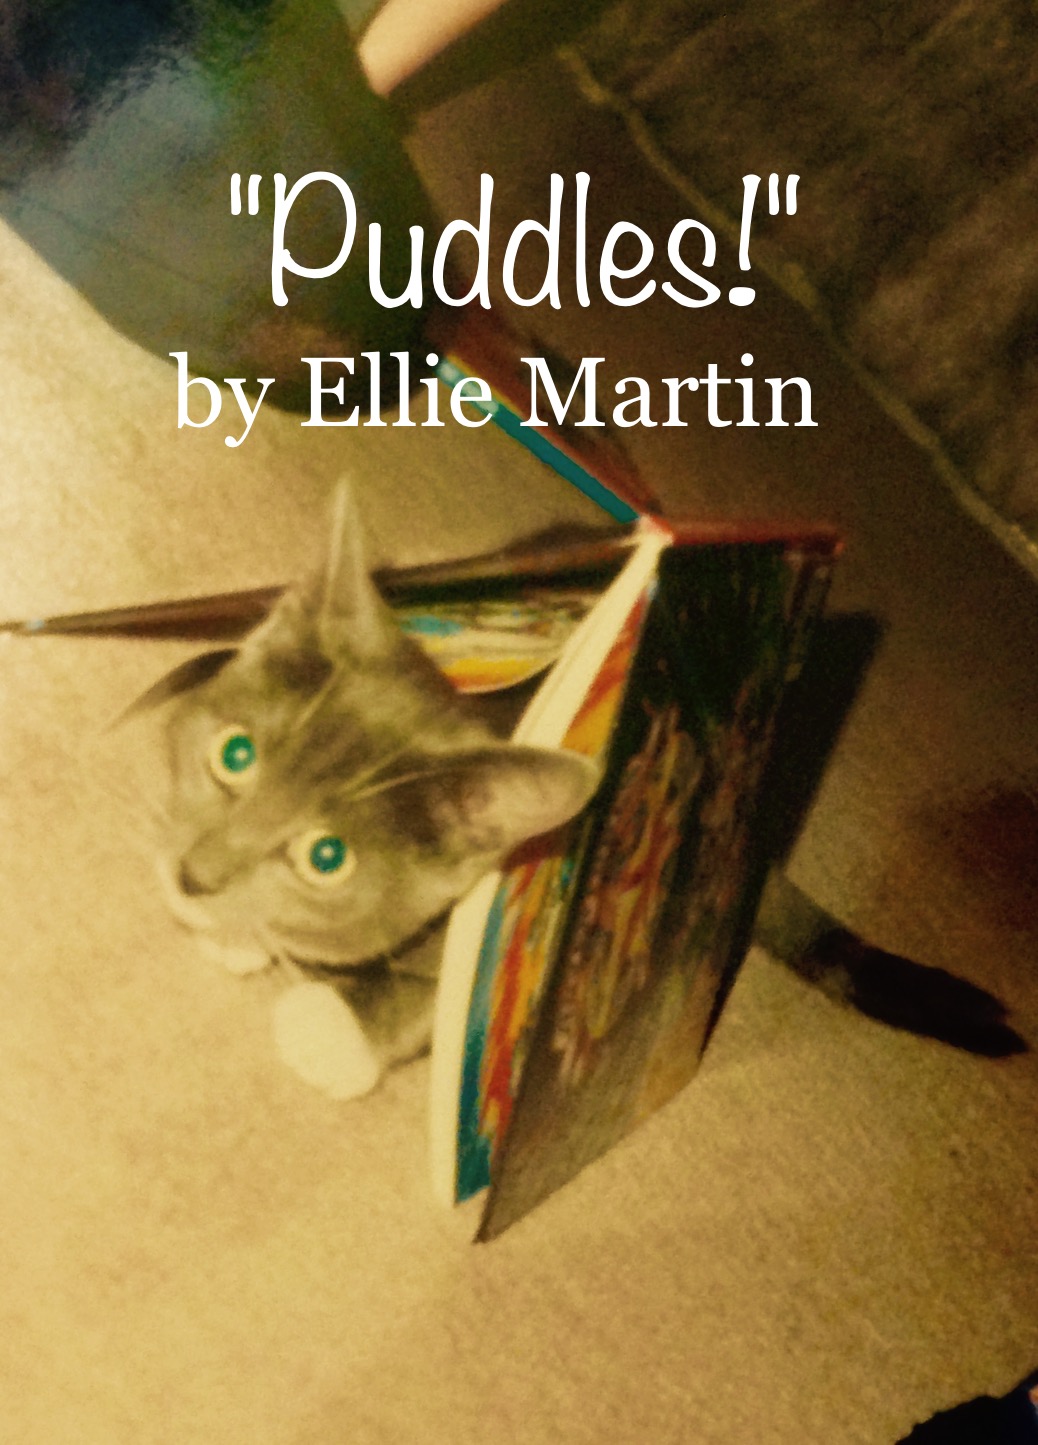 Puddles by Ellie Martin cover